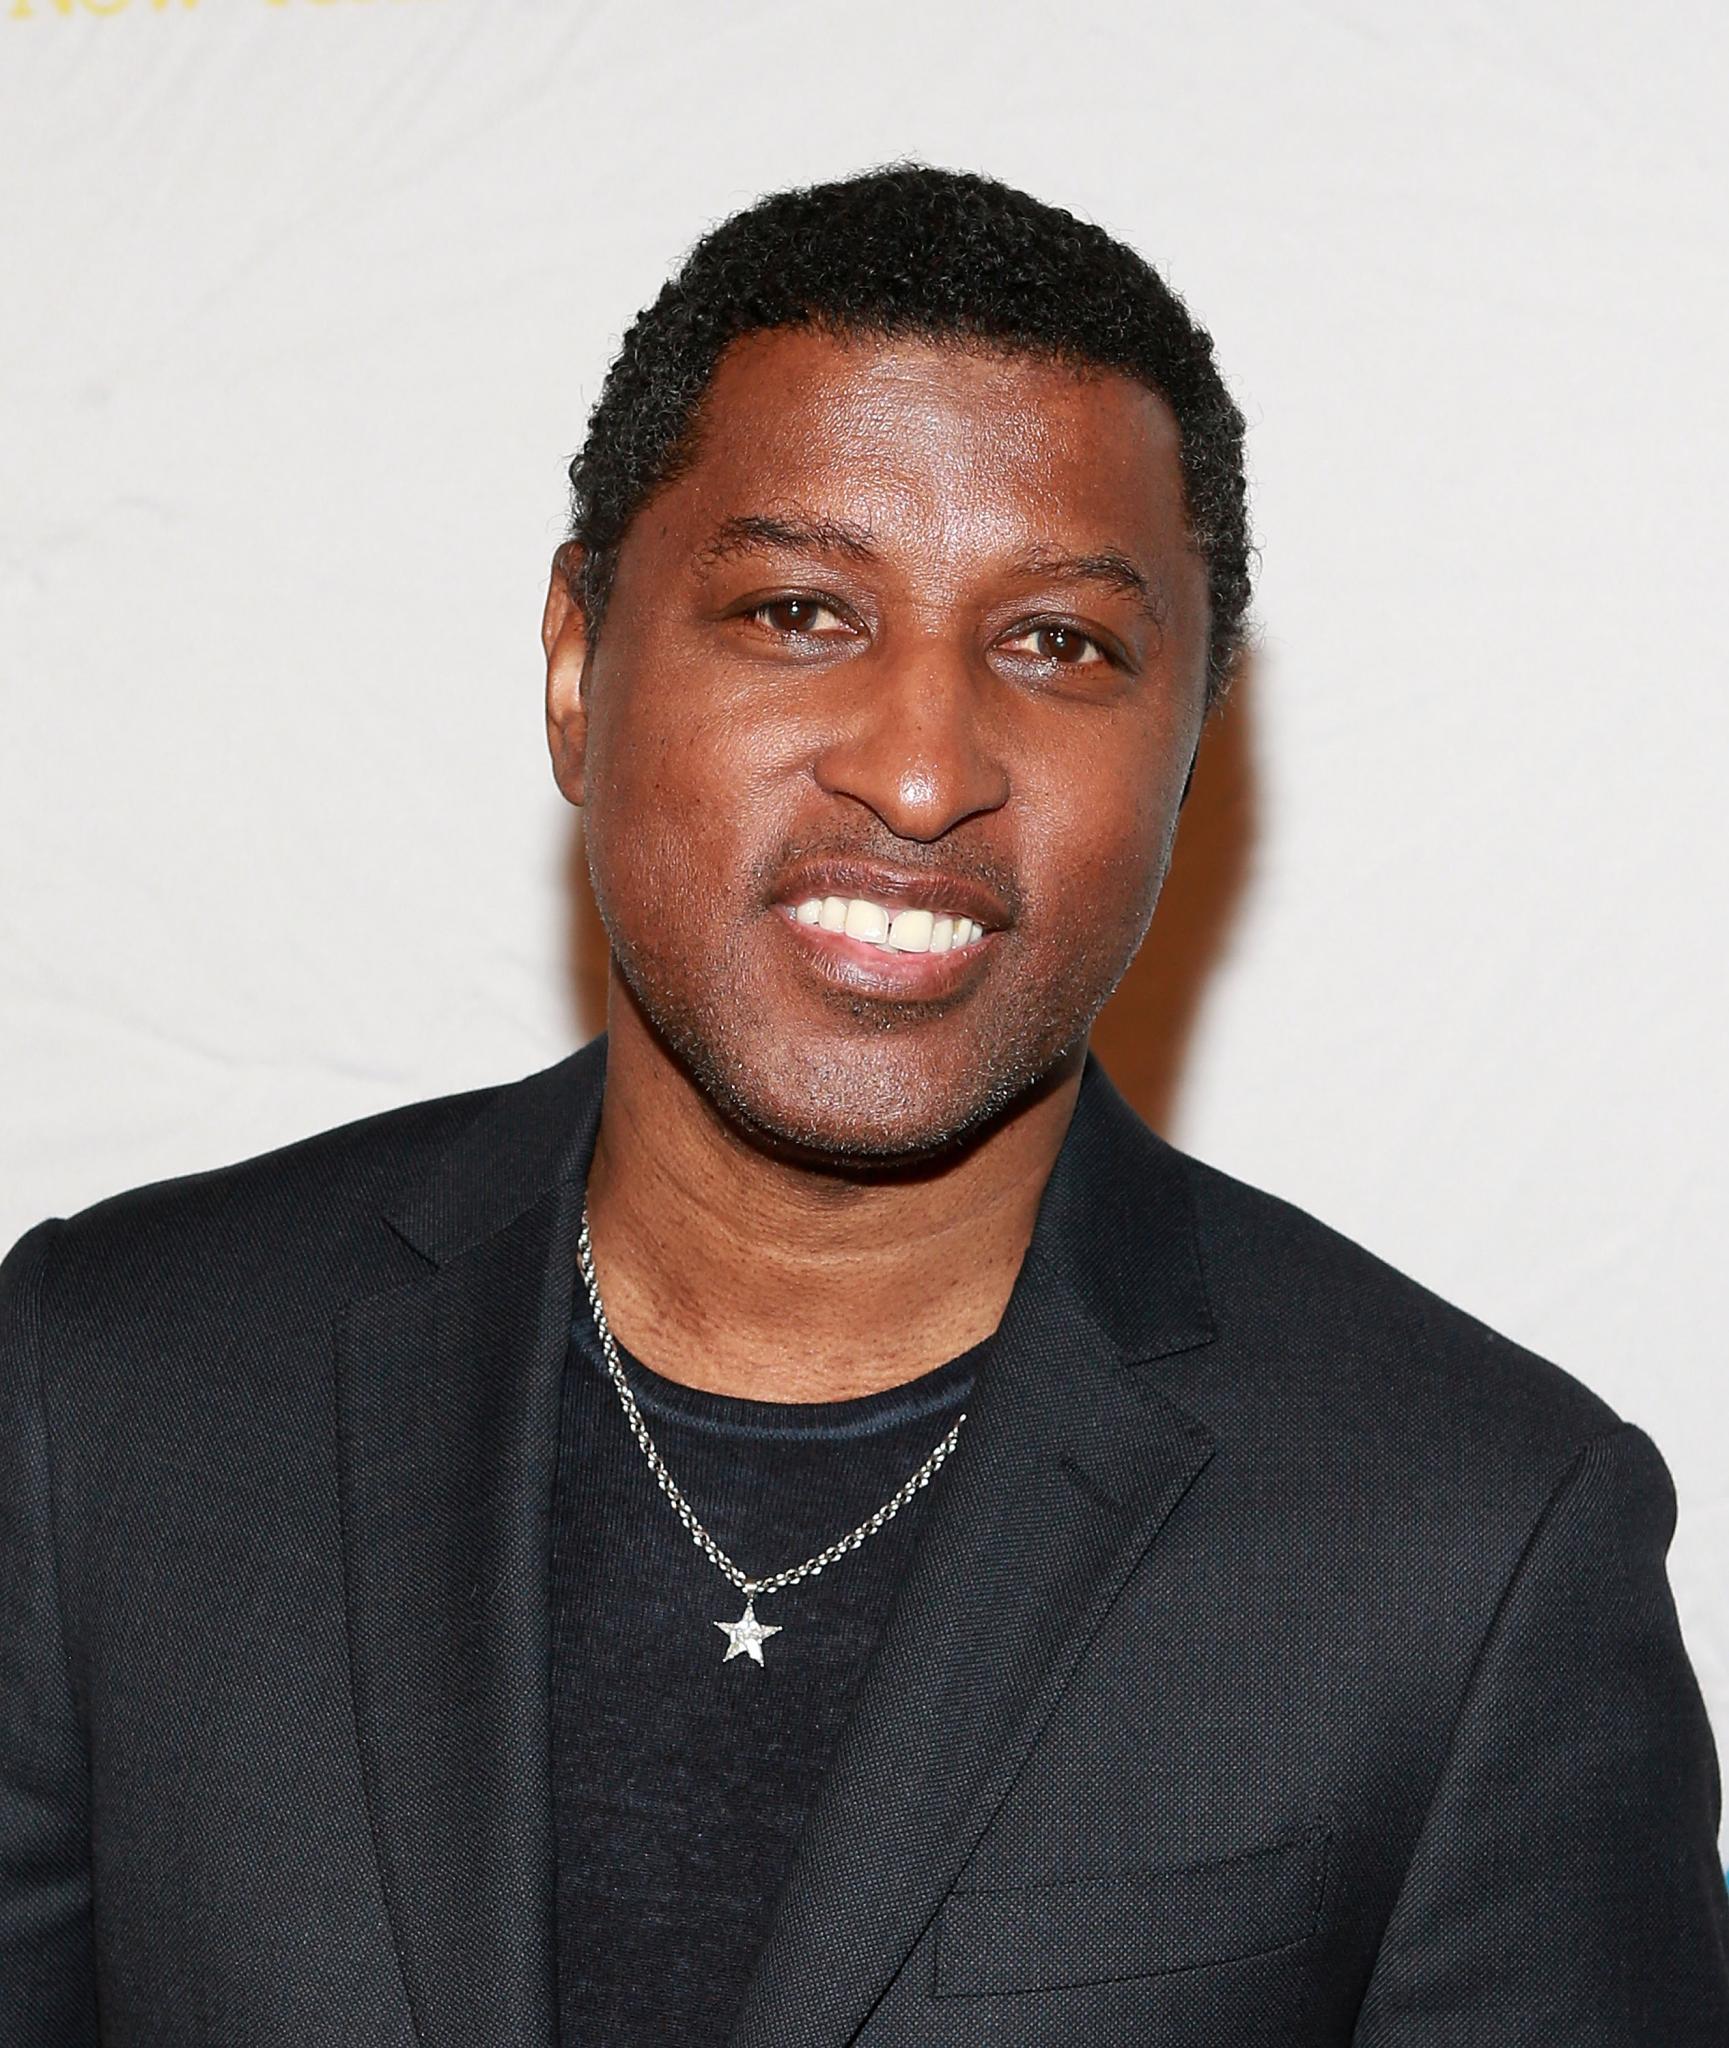 18 Classic Love Songs We Can Thank Babyface For